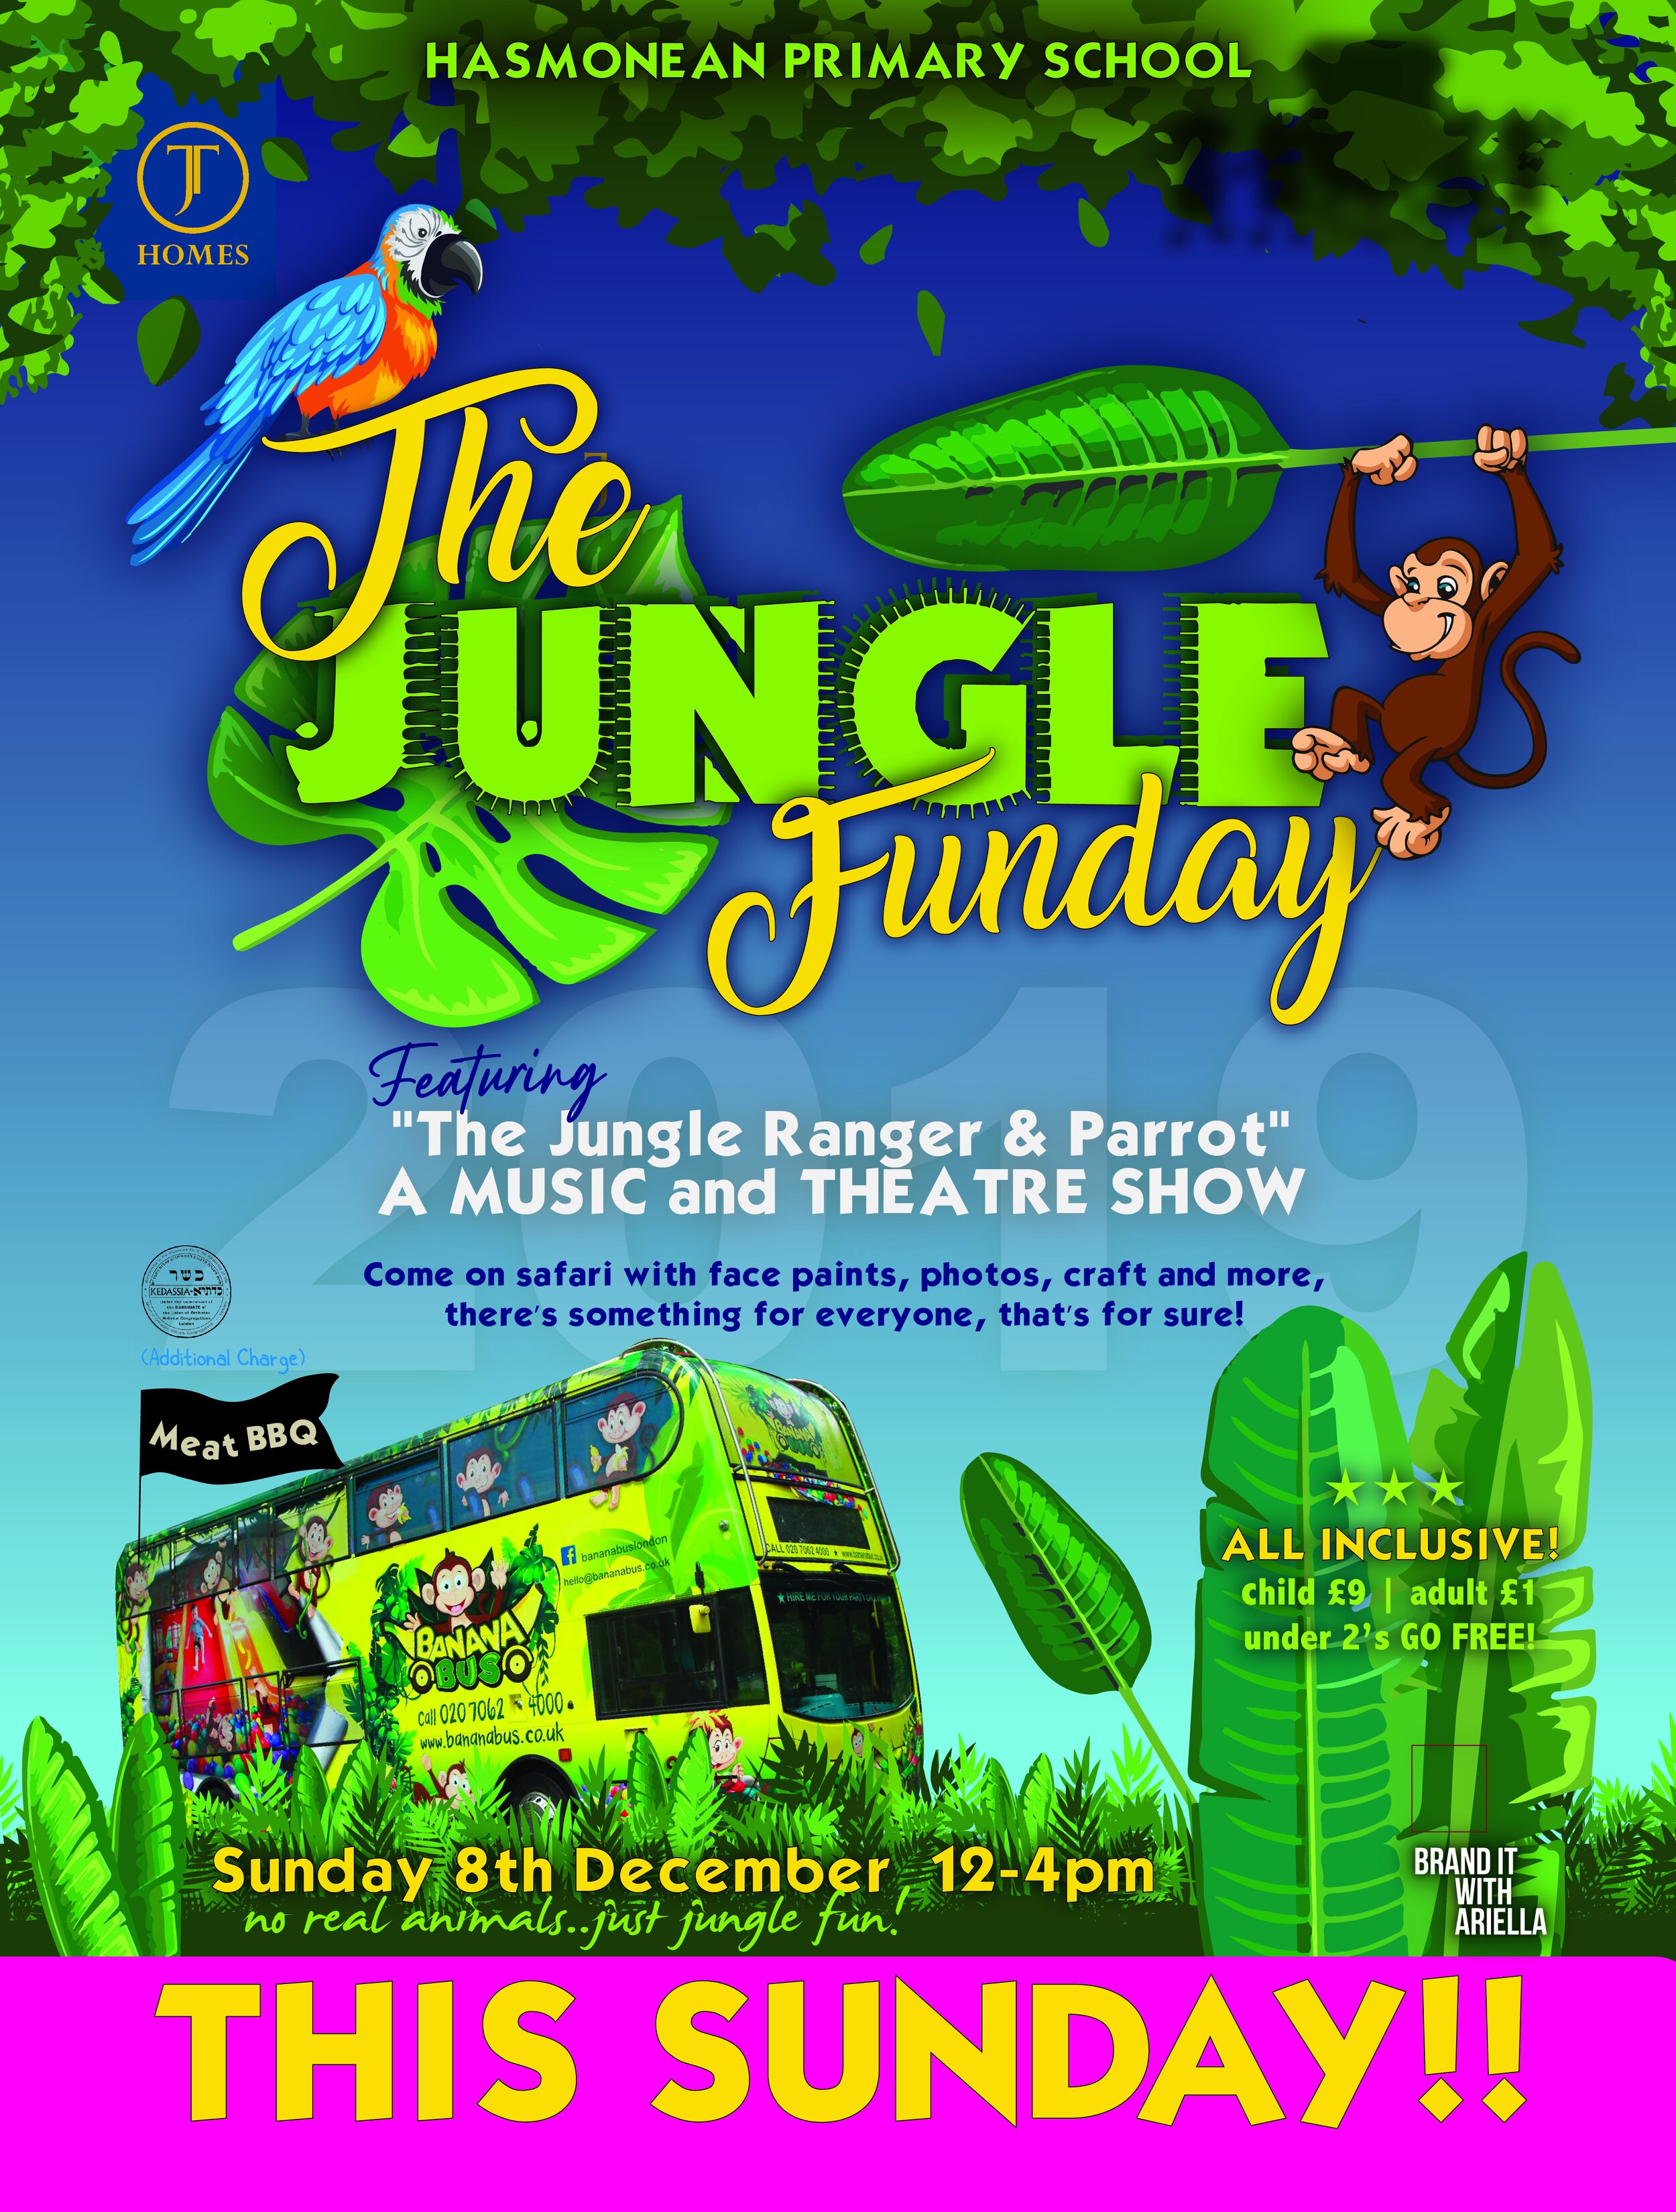 HSM The Jungle Funday 2019 FLYER 8 FACEBOOK THIS SUNDAY-01.jpg